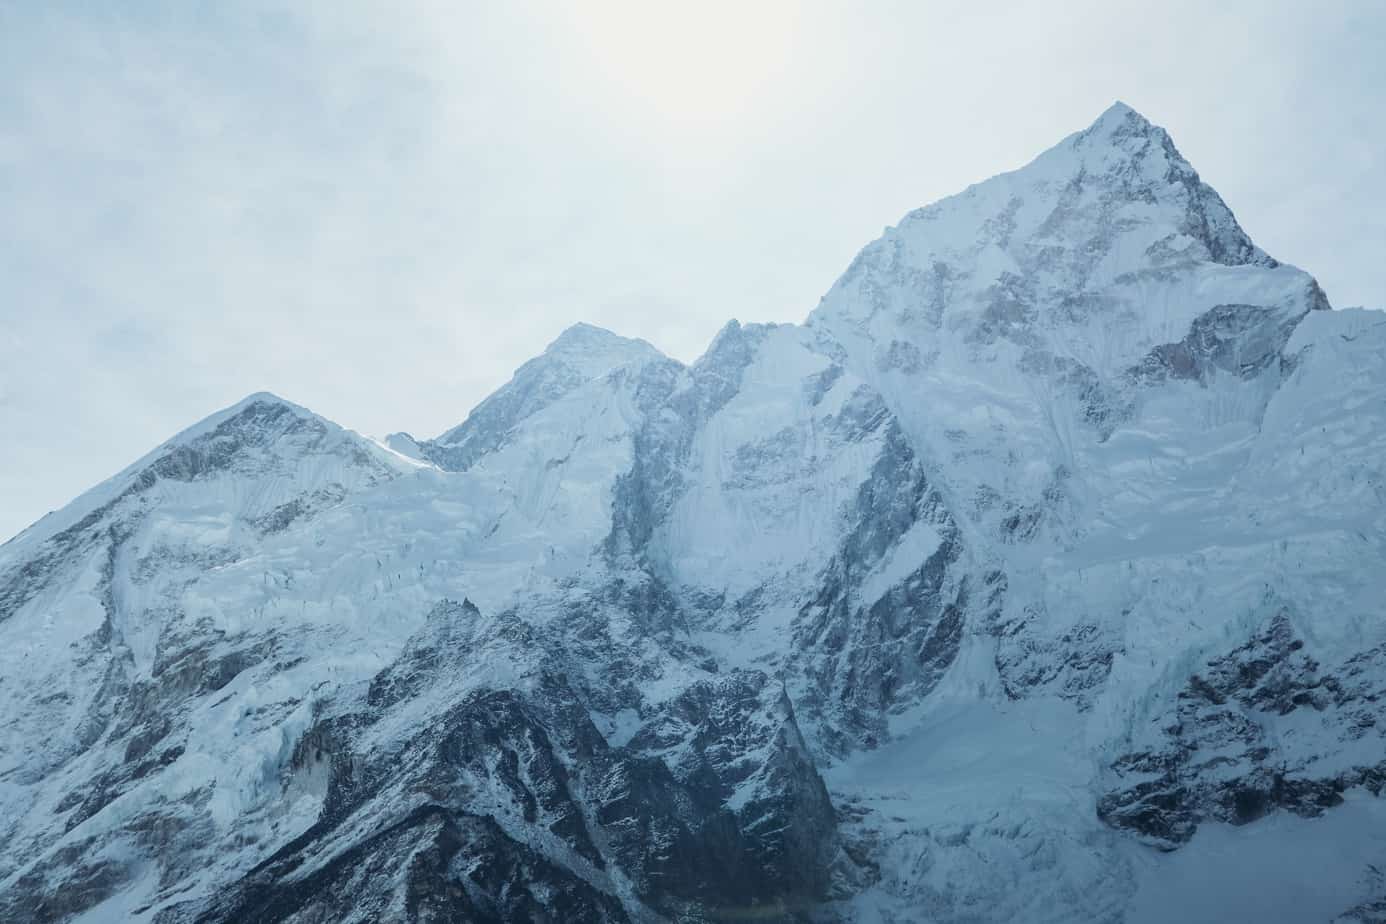 Thinking of trekking to Everest Base Camp? These 25 photos will inspire you to trek Everest Base Camp, along with practical tips for making the trek happen. #trekking #nepal #everestbasecamp #everestbasecamptrek